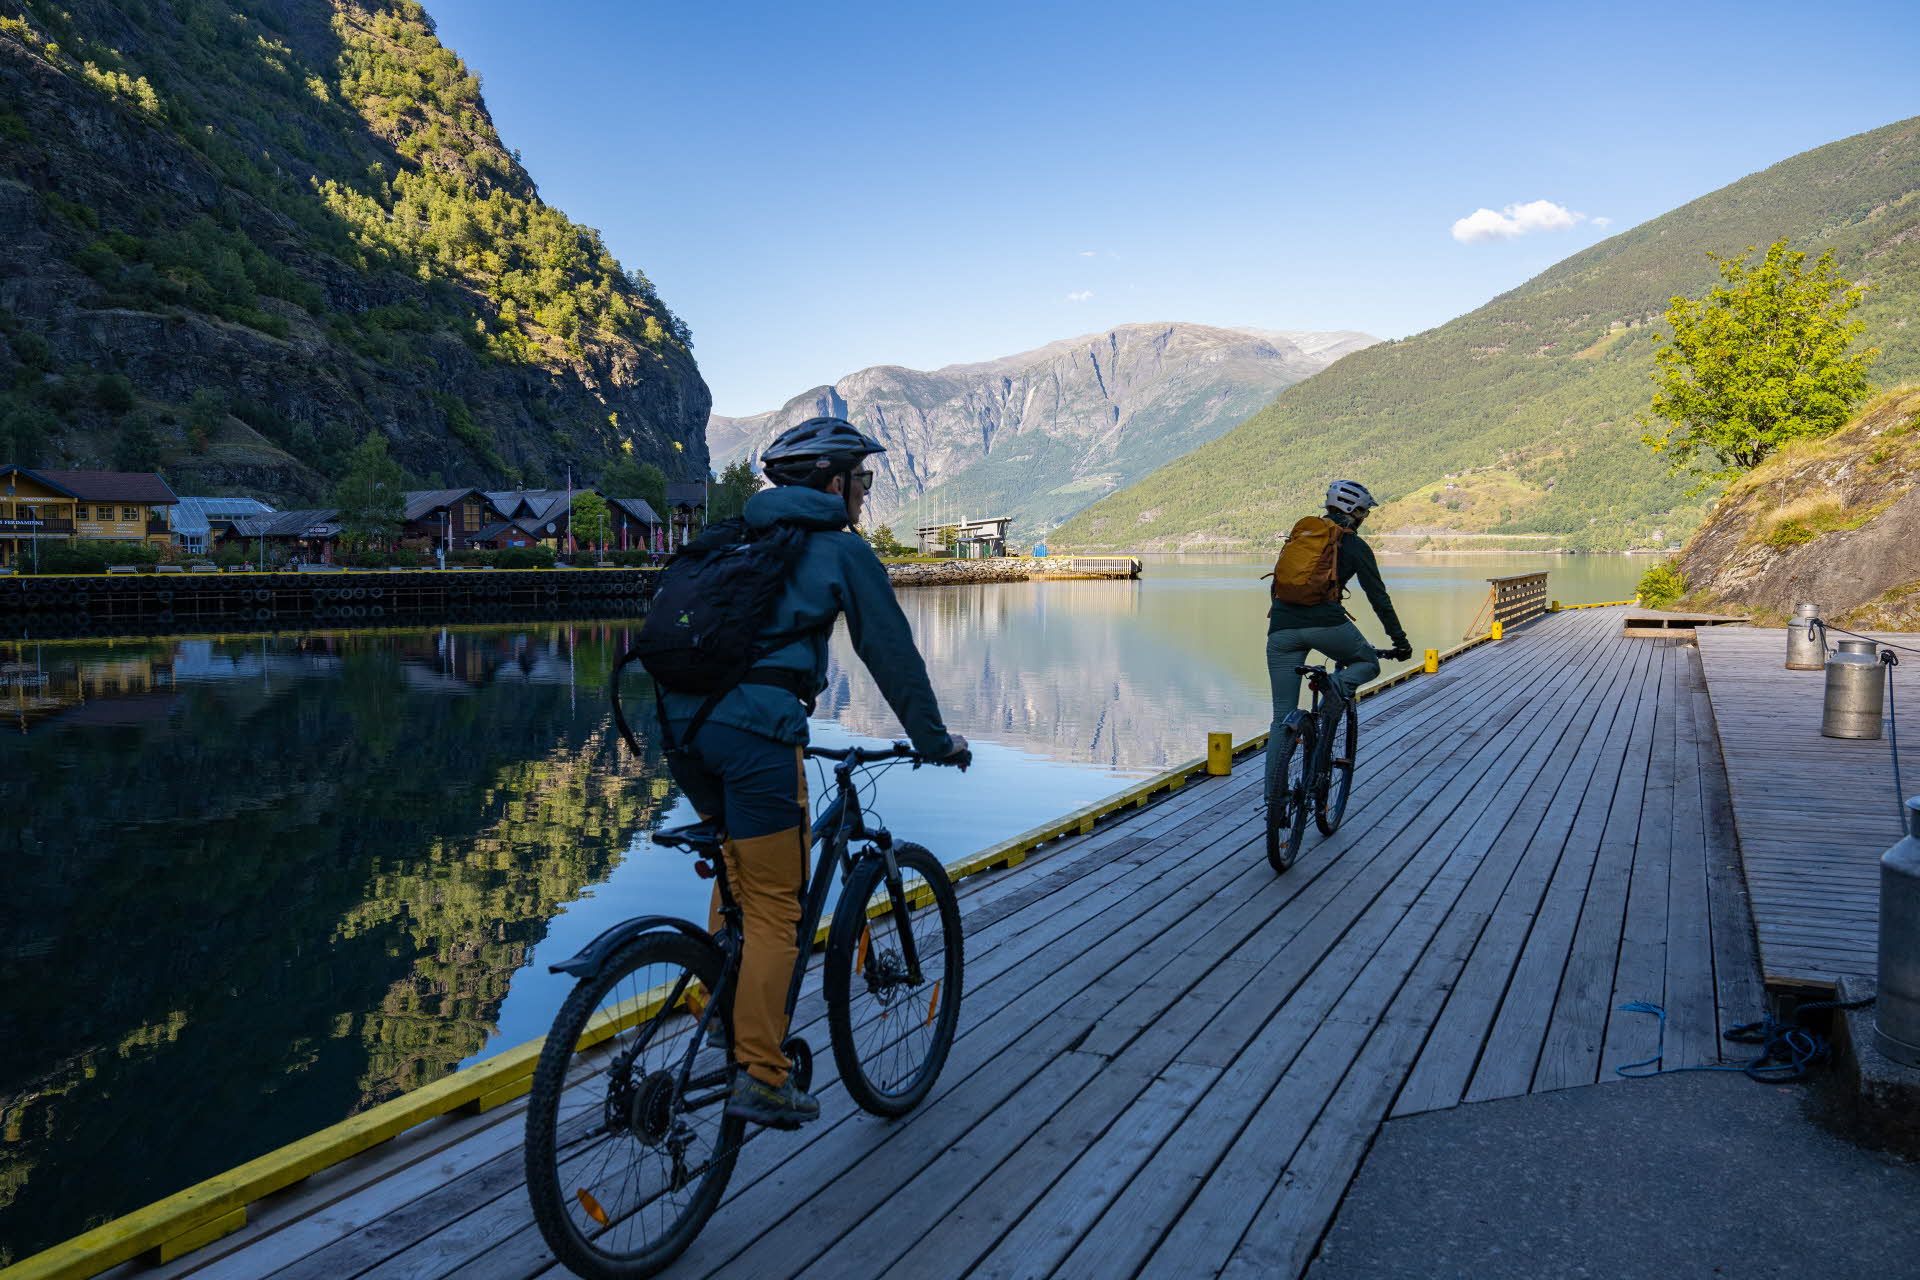 Two cyclists on the quay in Flåm with views of the sunny fjord.